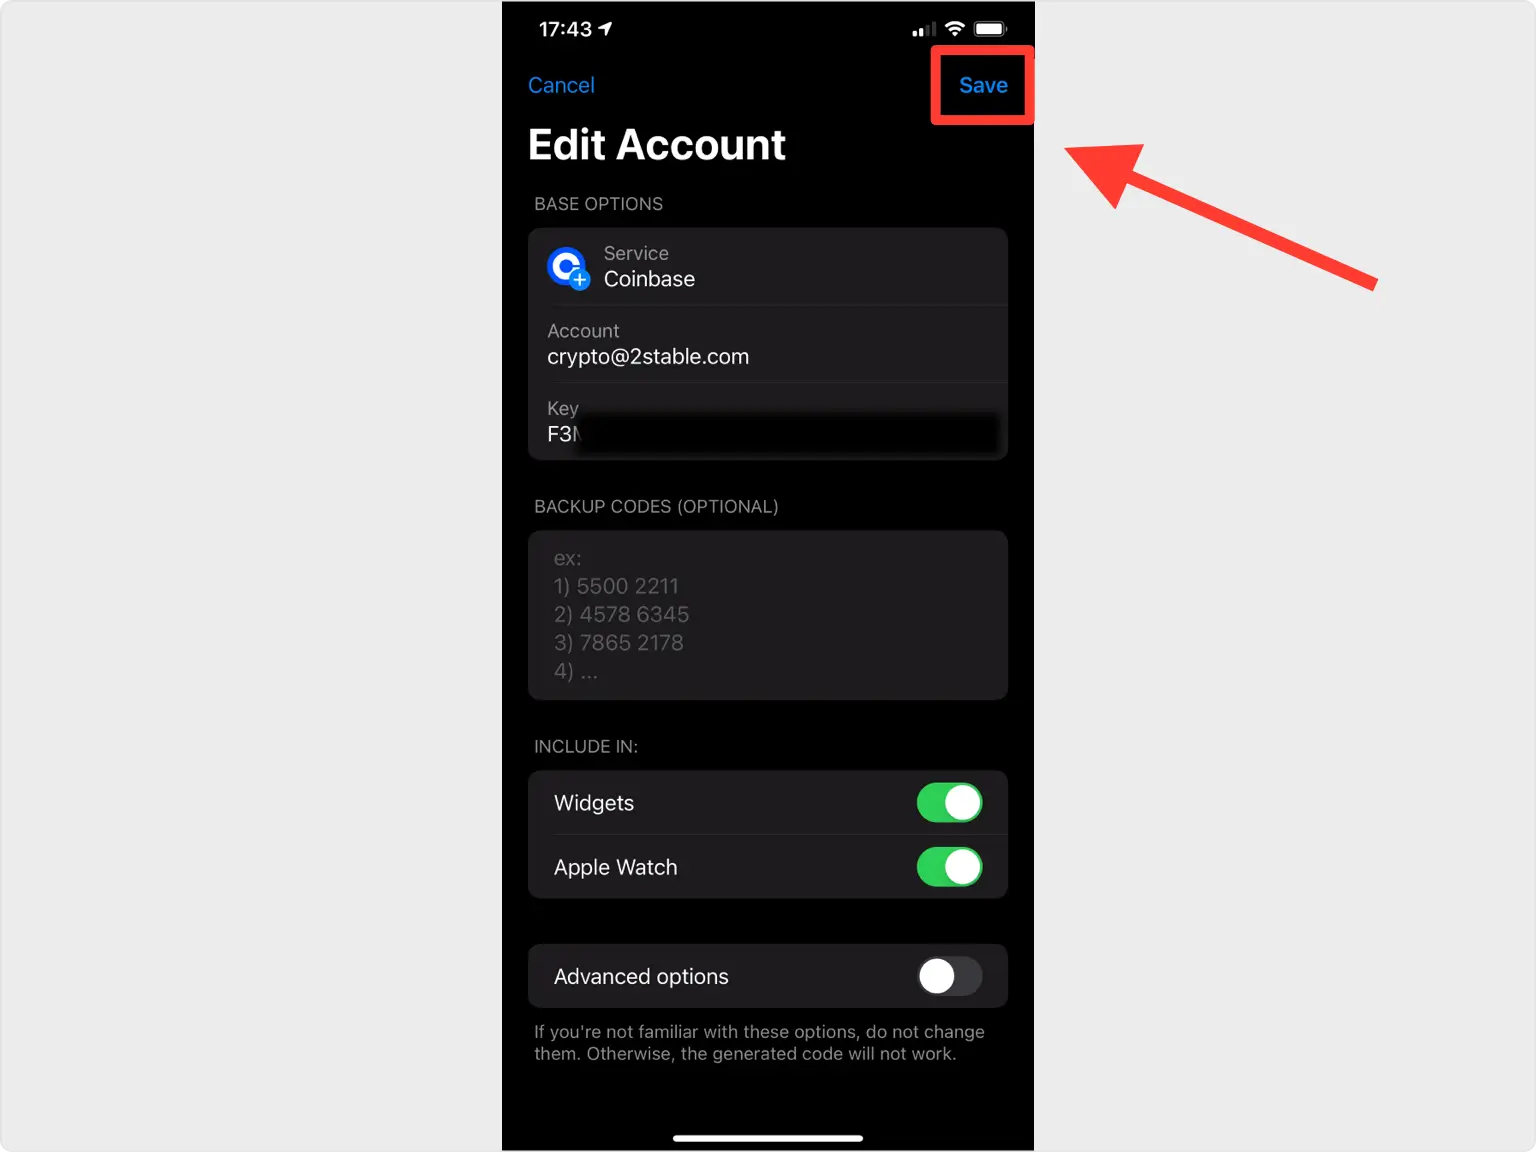 getting authenticator to work again with coinbase - Google Account Community